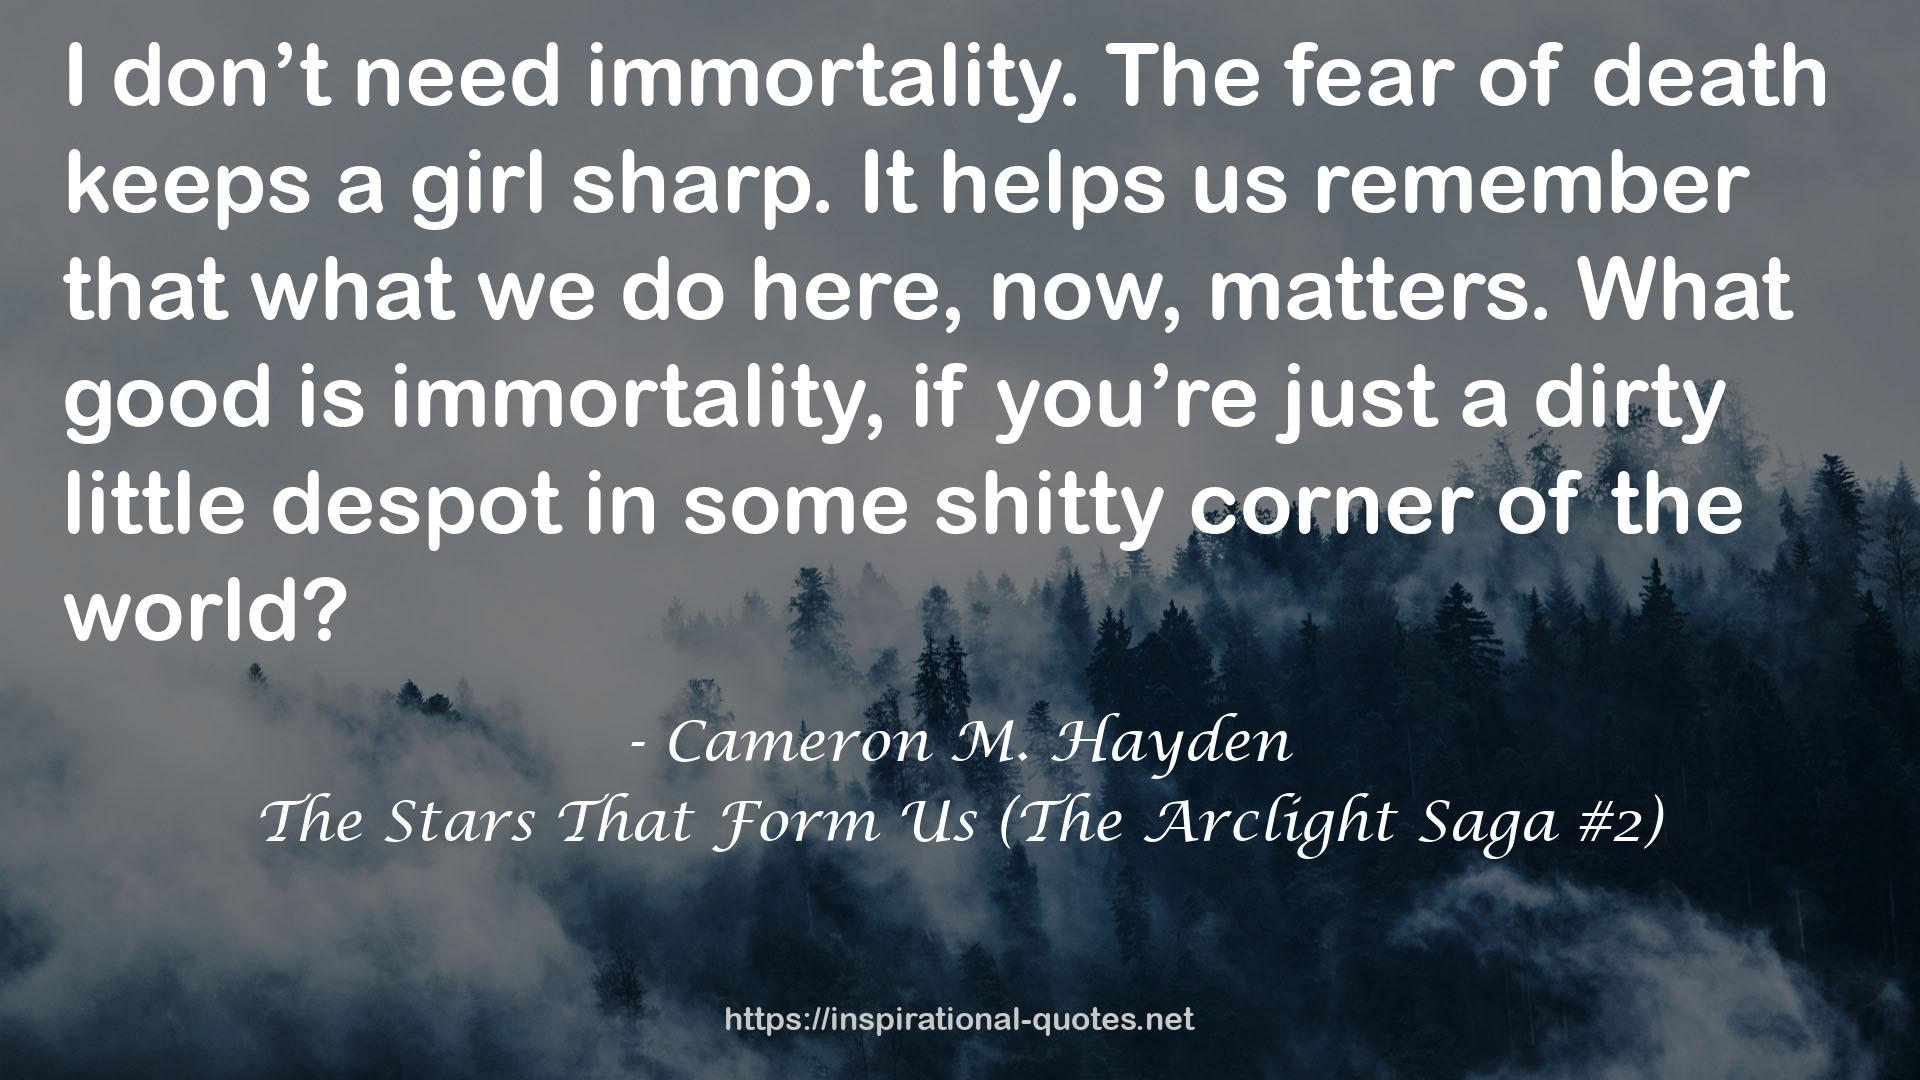 The Stars That Form Us (The Arclight Saga #2) QUOTES